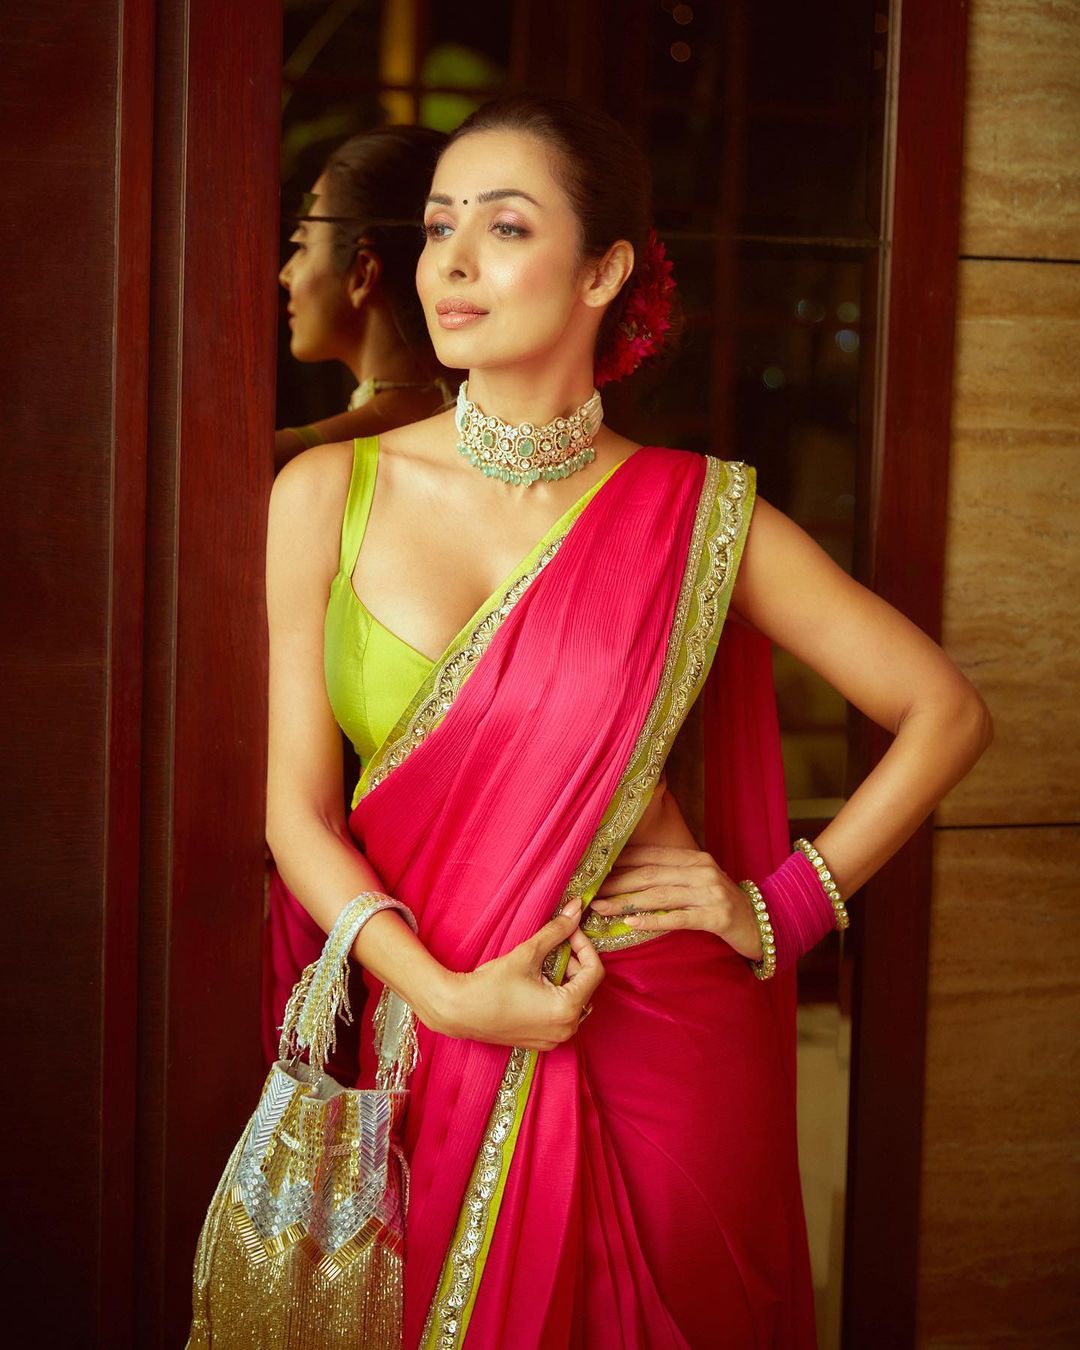 Malaika Arora flaunts her cleavage in the parrot green sleeveless blouse with a low neckline